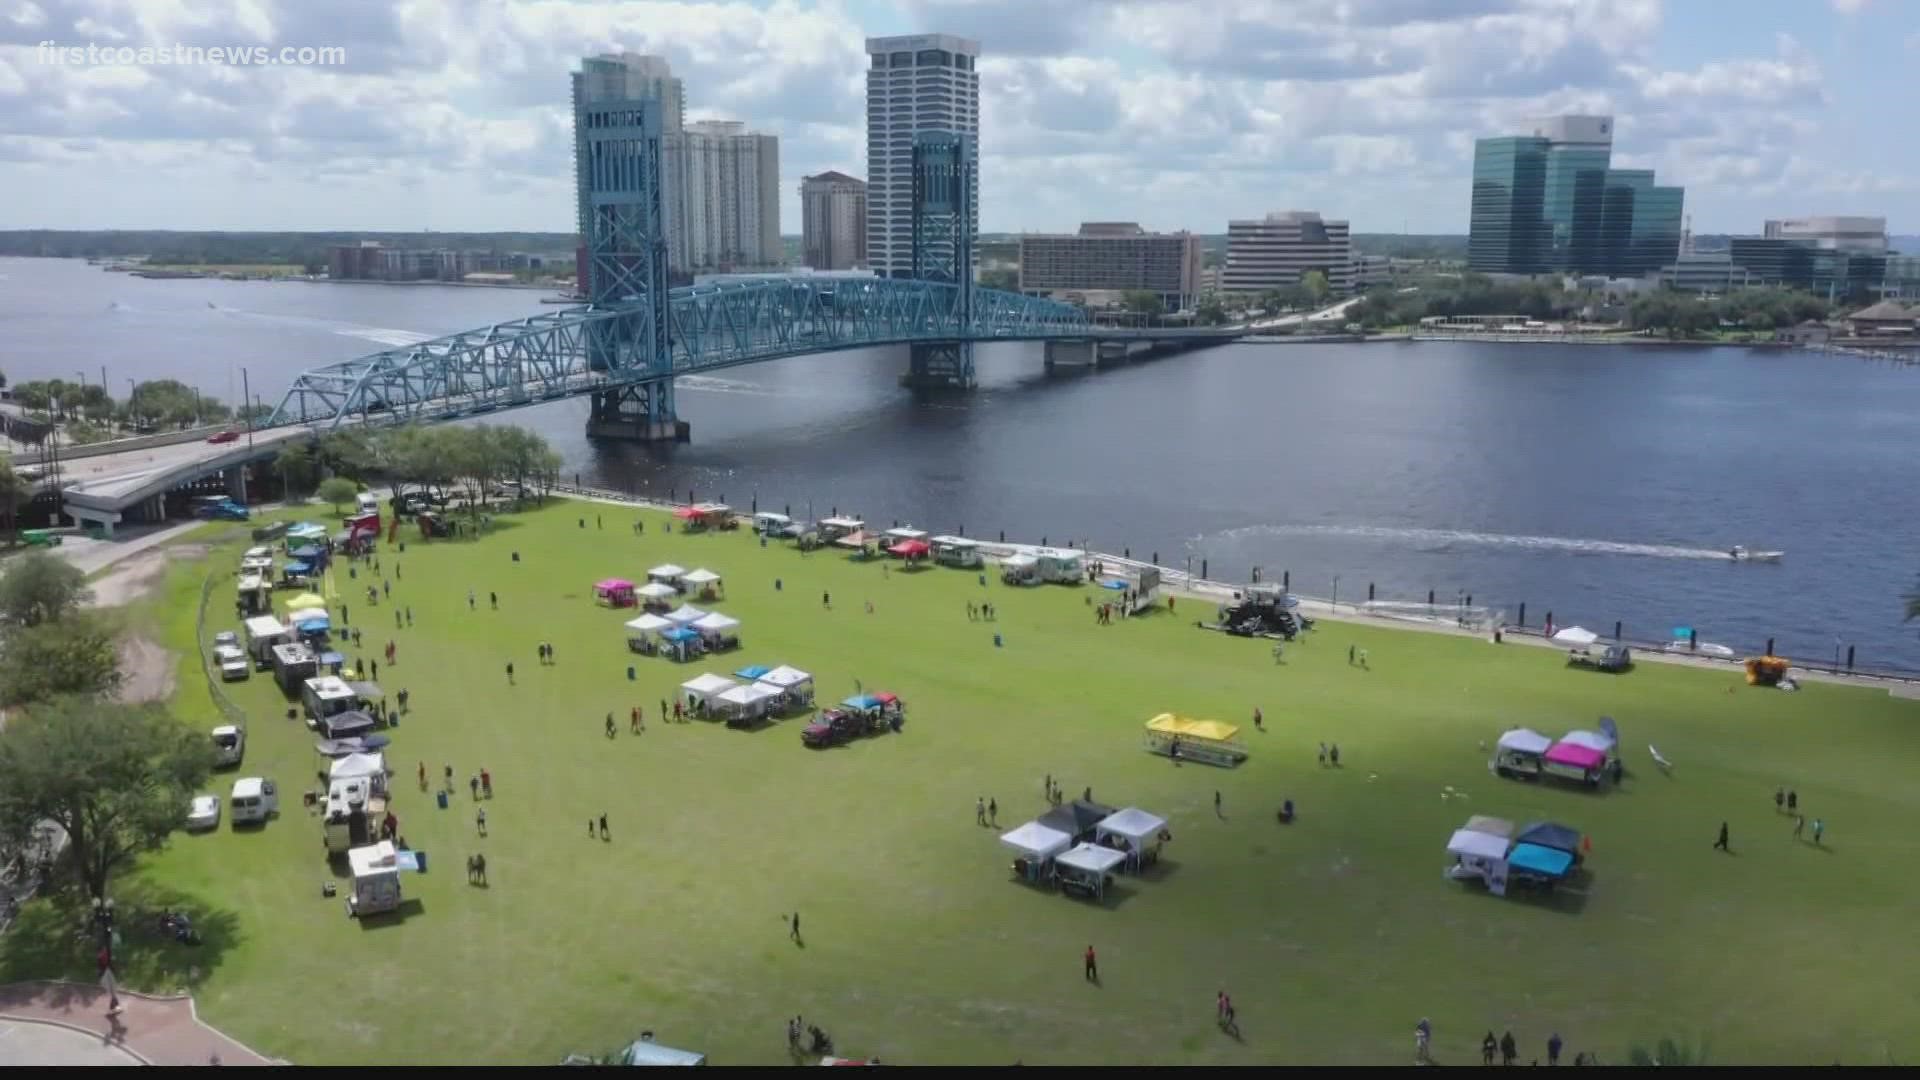 Organizers behind the campaign say the goal is to showcase local business and stimulate the Jacksonville economy.